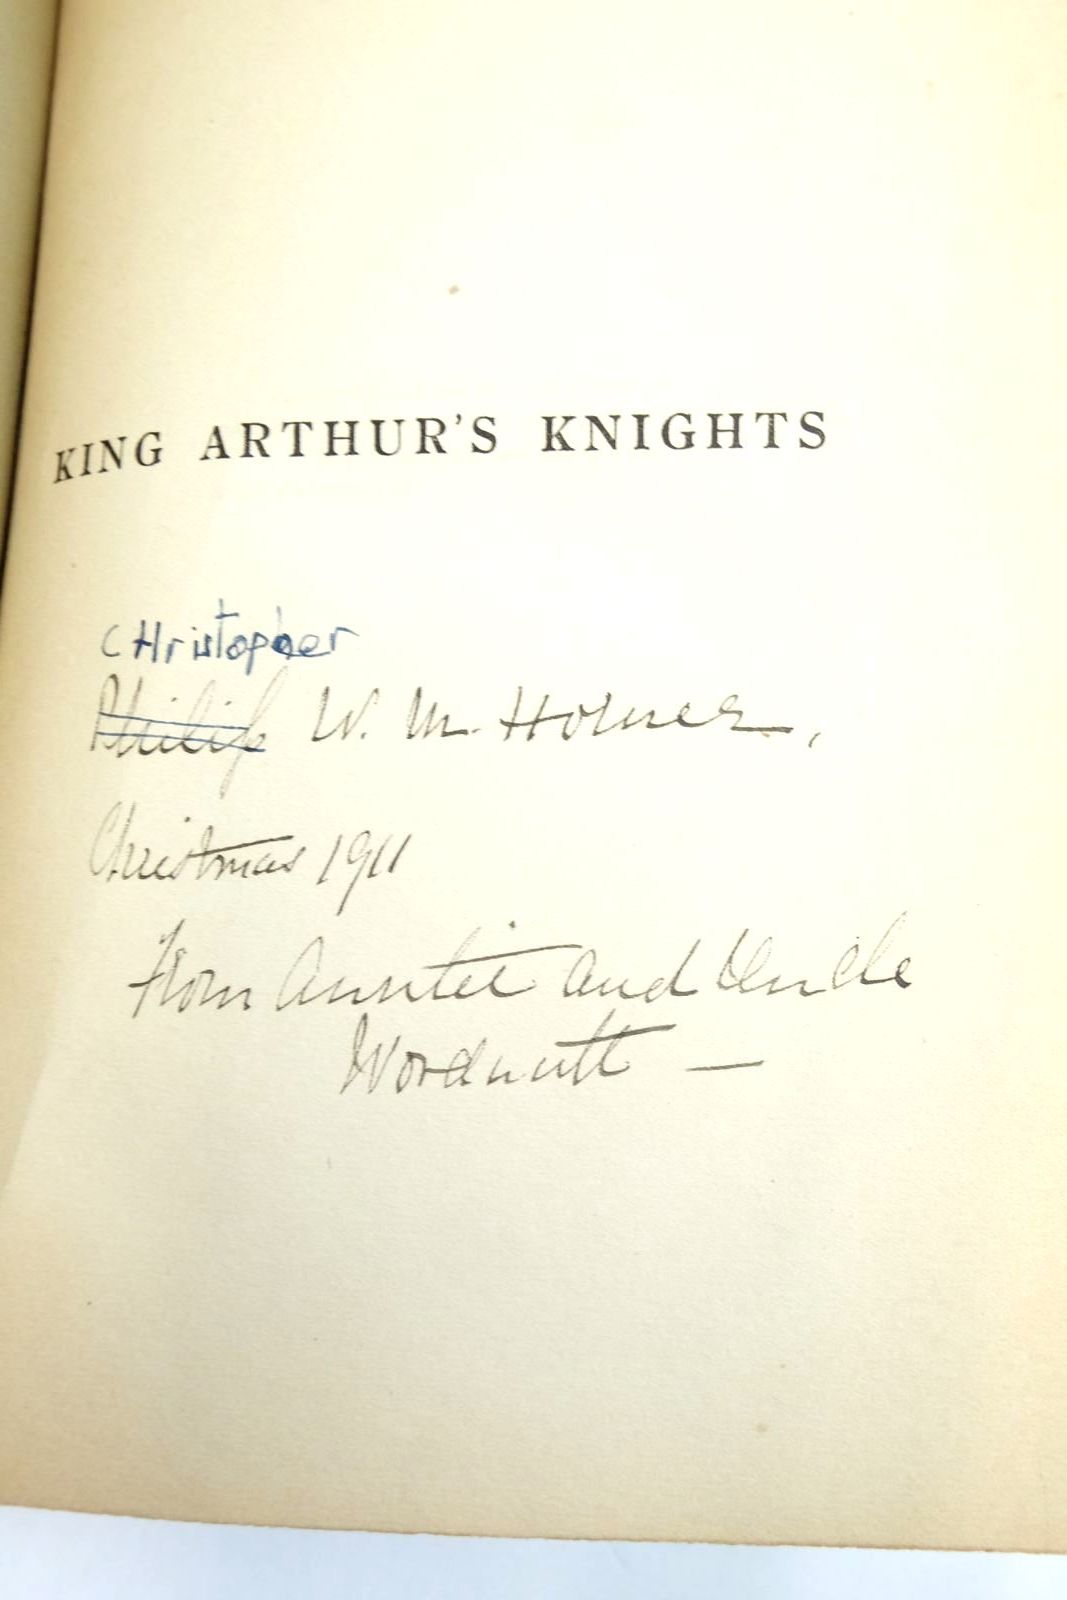 Photo of KING ARTHUR'S KNIGHTS written by Gilbert, Henry illustrated by Crane, Walter published by T.C. & E.C. Jack Ltd. (STOCK CODE: 2138085)  for sale by Stella & Rose's Books